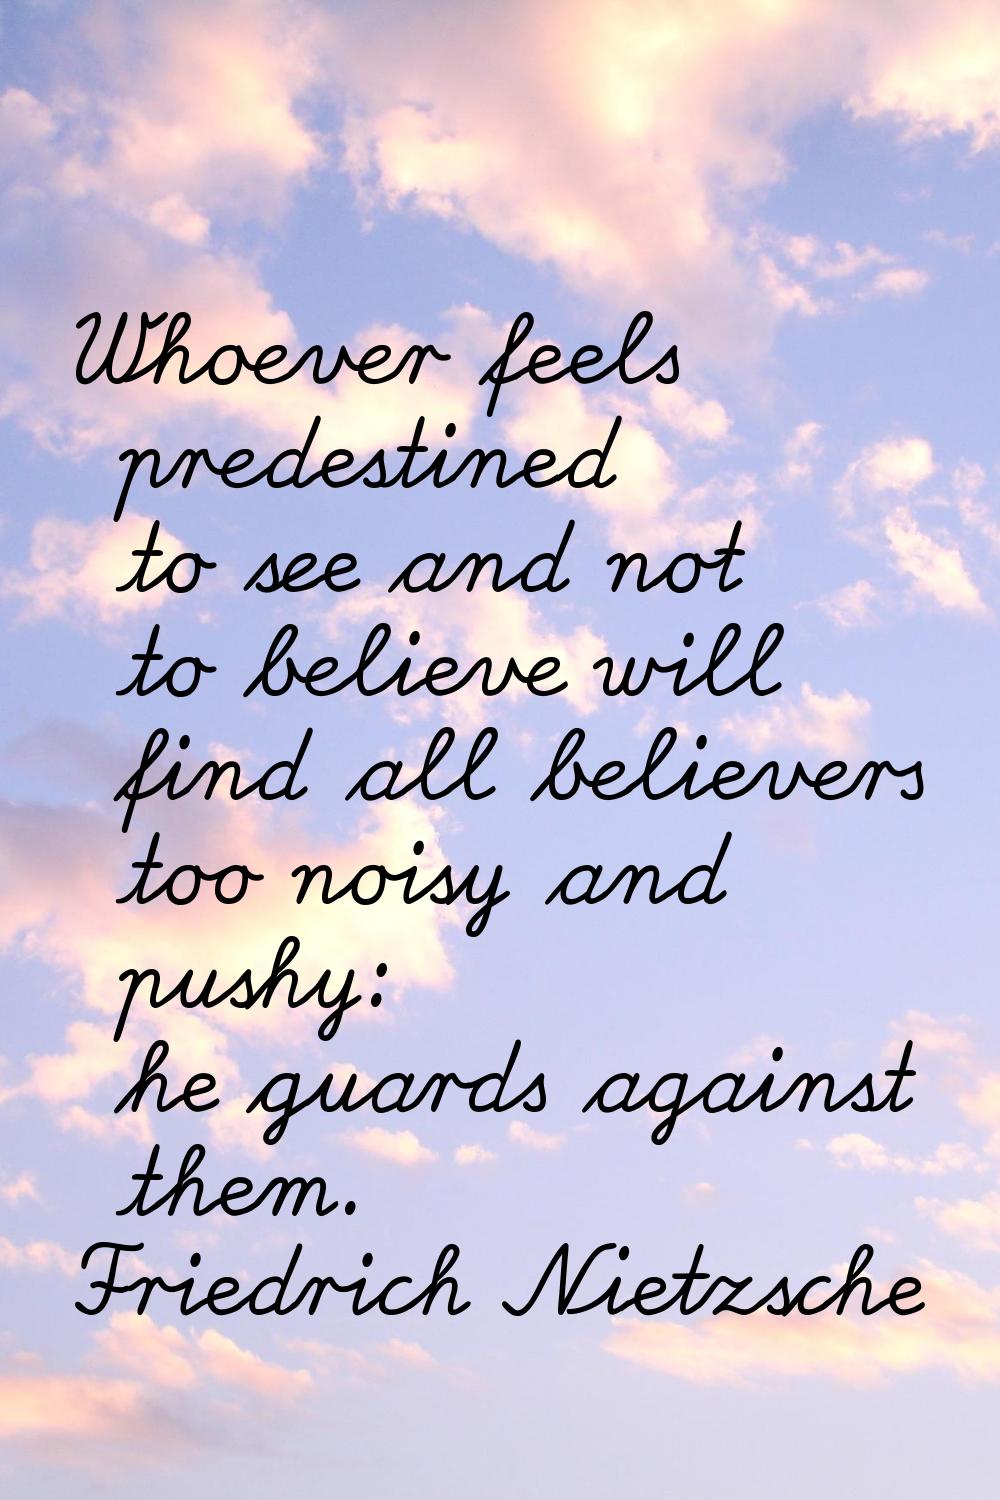 Whoever feels predestined to see and not to believe will find all believers too noisy and pushy: he